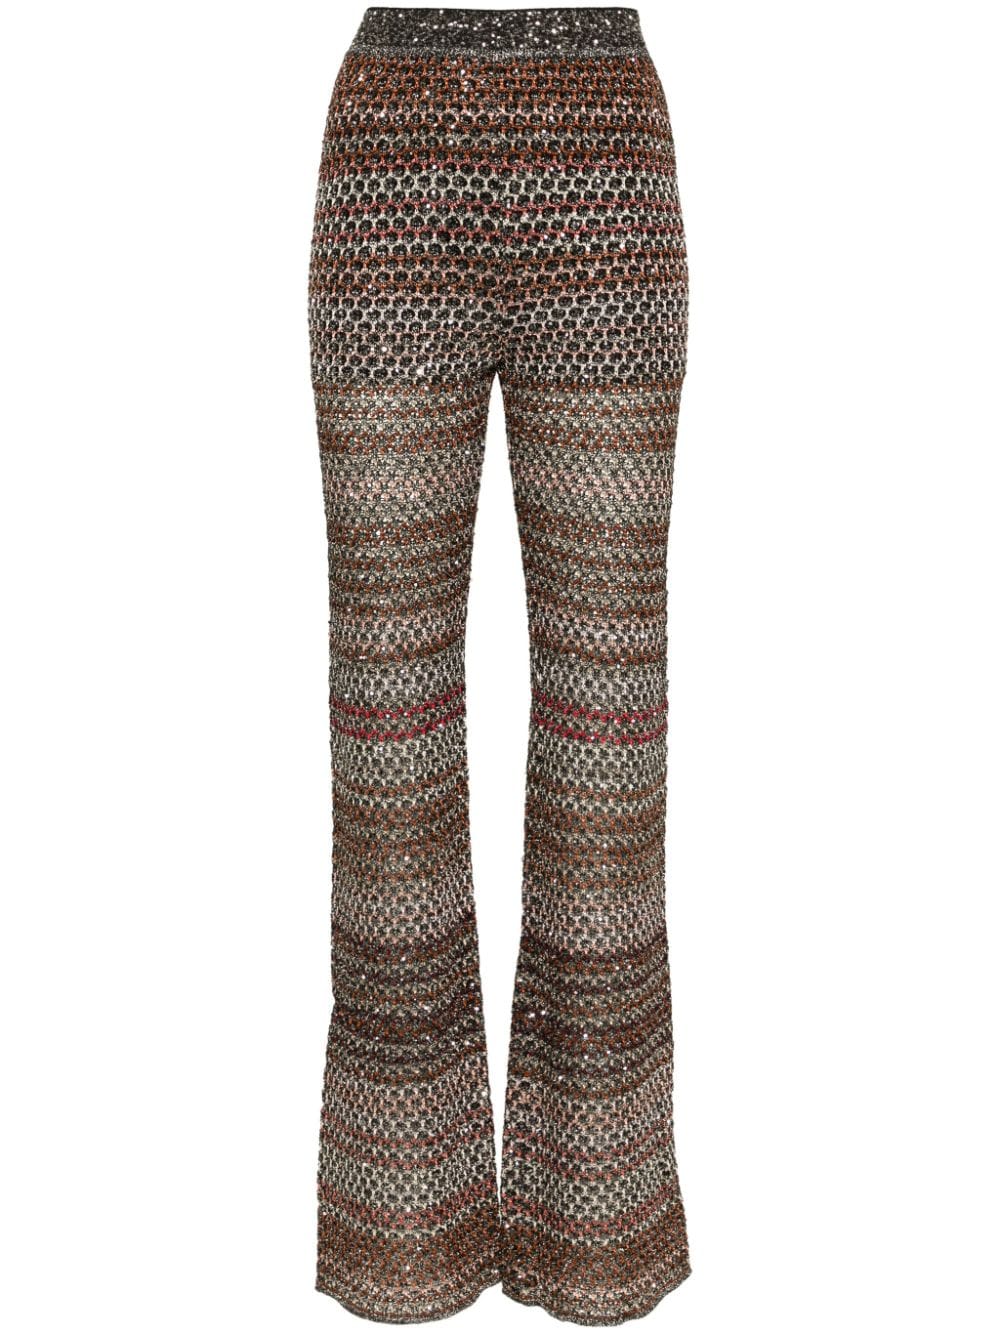 Flared Trousers: Black & Multicolor Metallic Honeycomb Knit & Sequin Embellished for Women